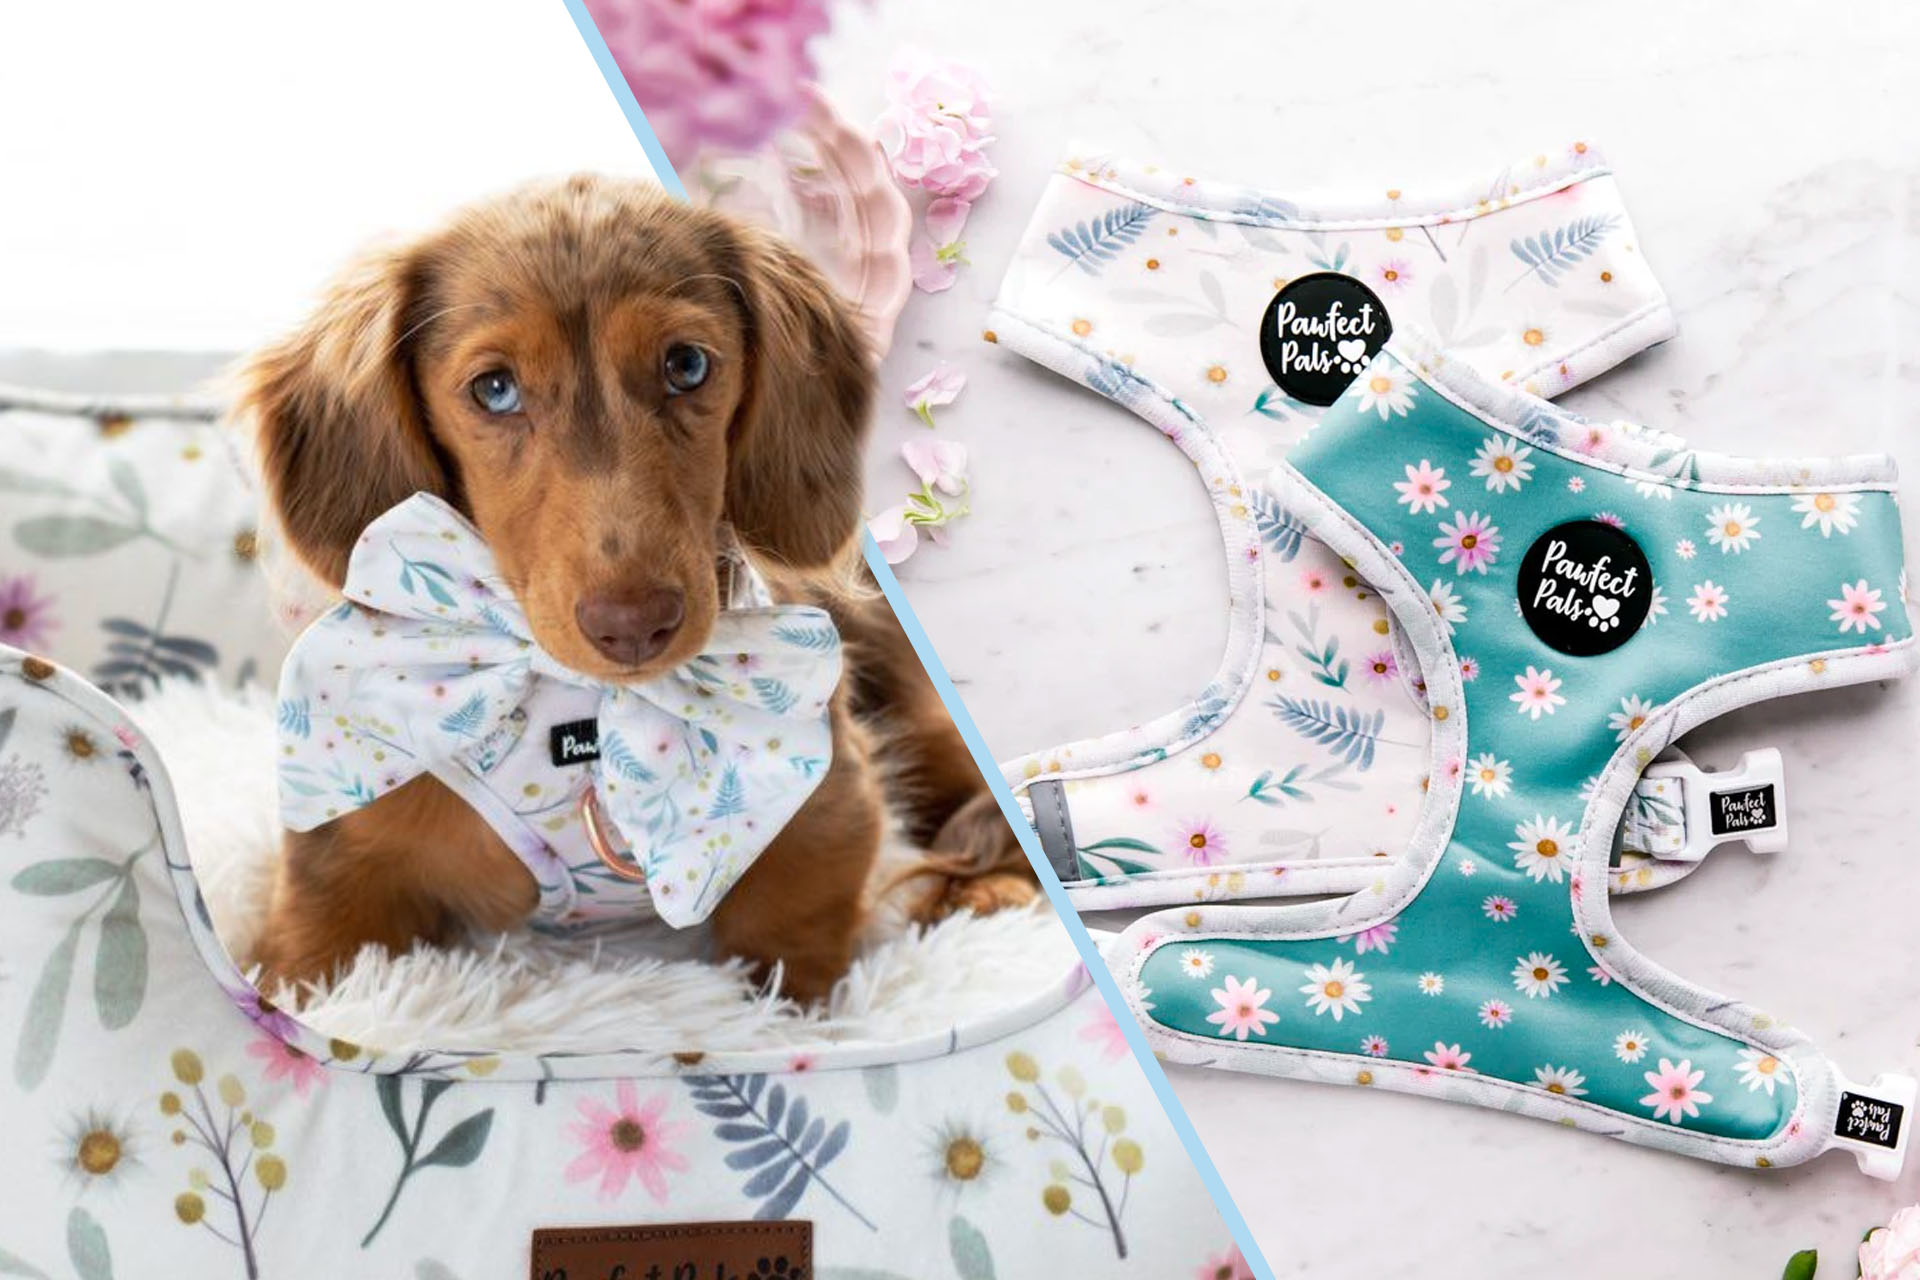 Daisy Baby dog accessories collection.